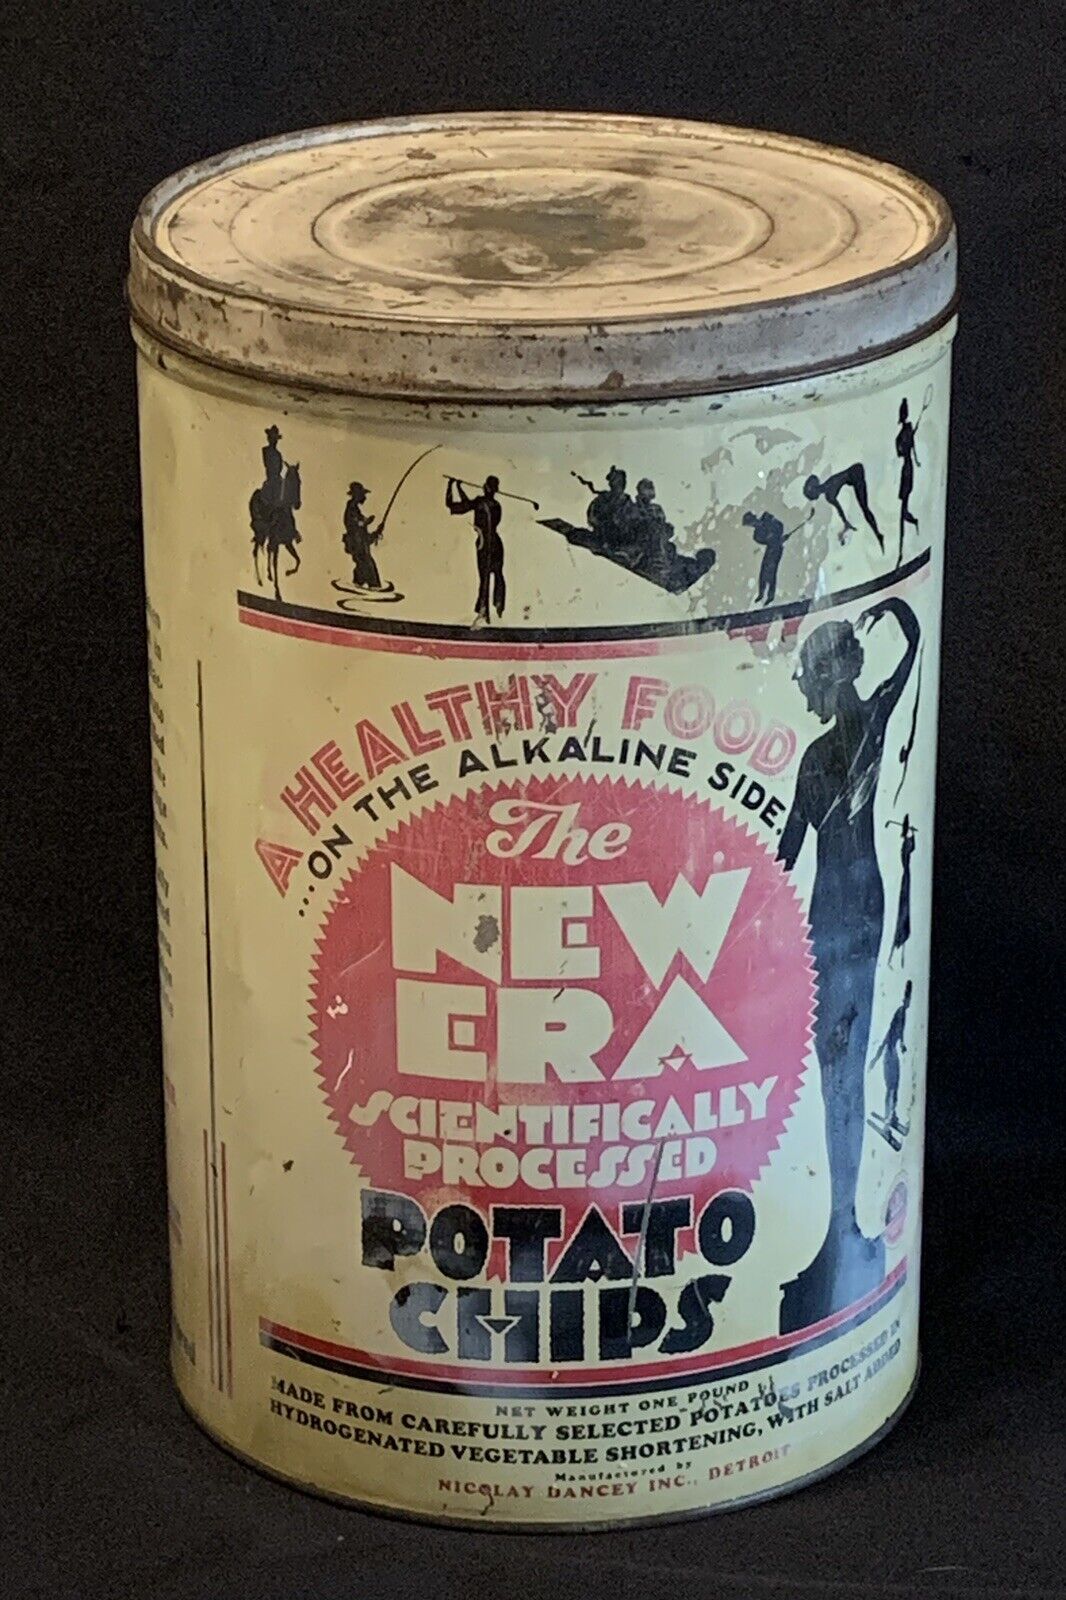 VTG 50's NEW ERA POTATO CHIP CAN Healthy Food Scientifically Processed 1 LB CAN